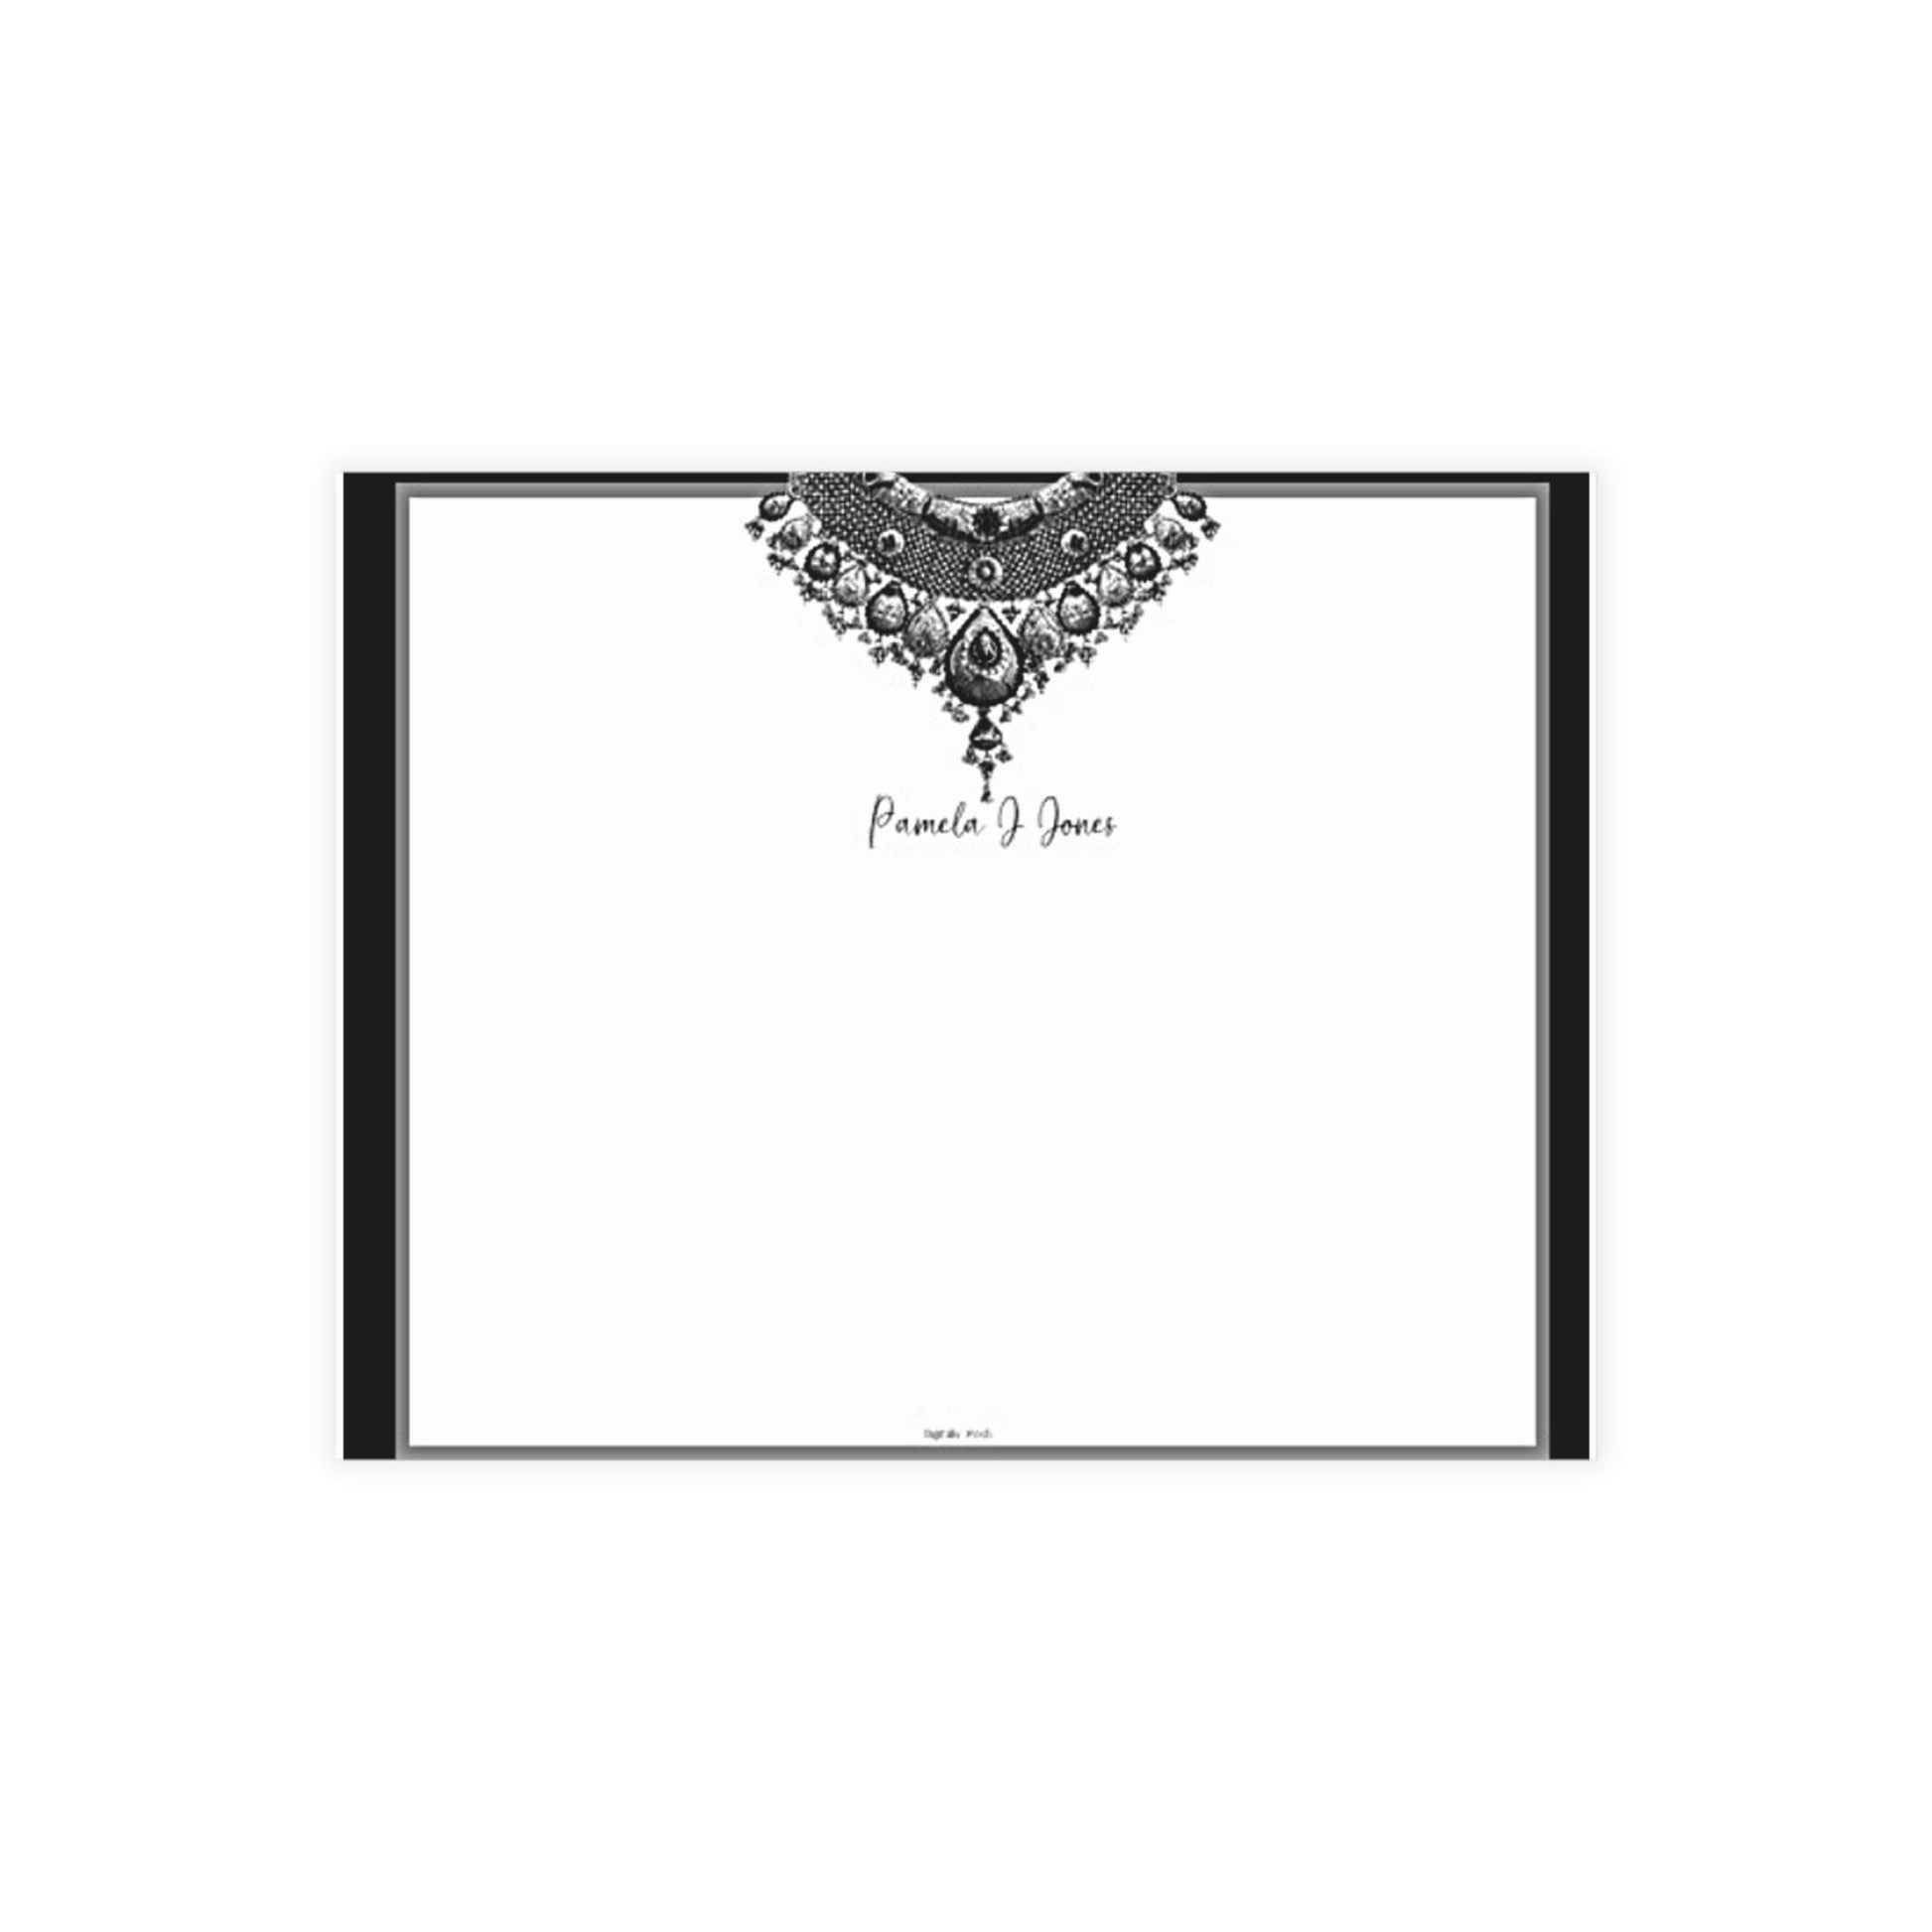 Personalized Note Card: Add a Personal Touch with Customized Stationery for Every Occasion. Notecard Black Jewels